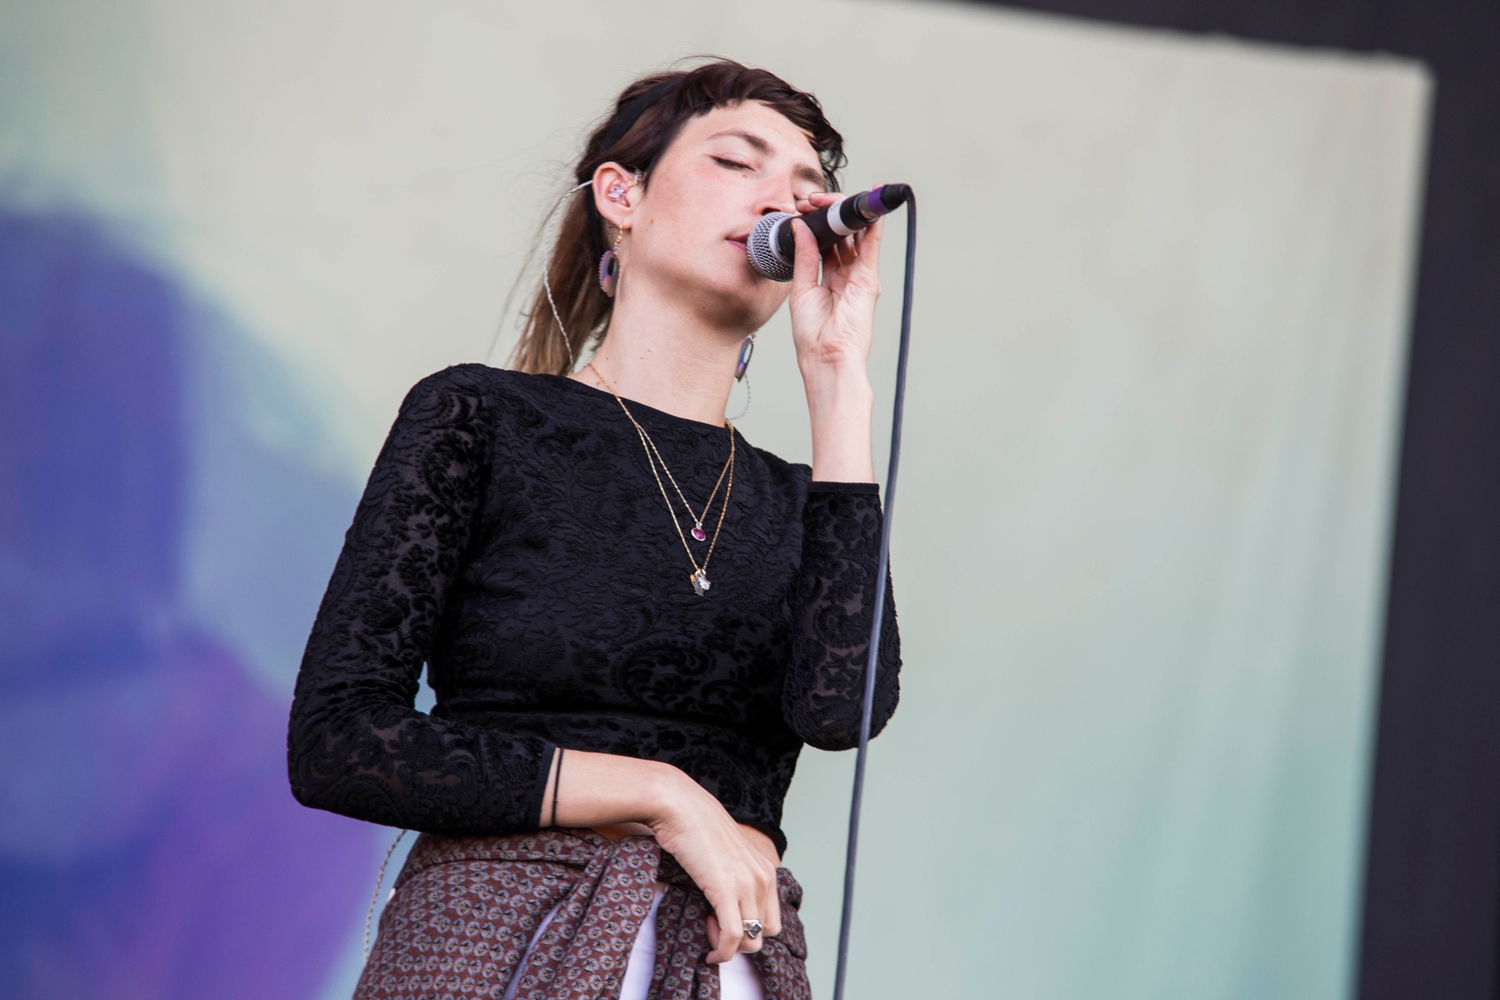 Warpaint bring heady, spaced-out jams to Latitude 2015